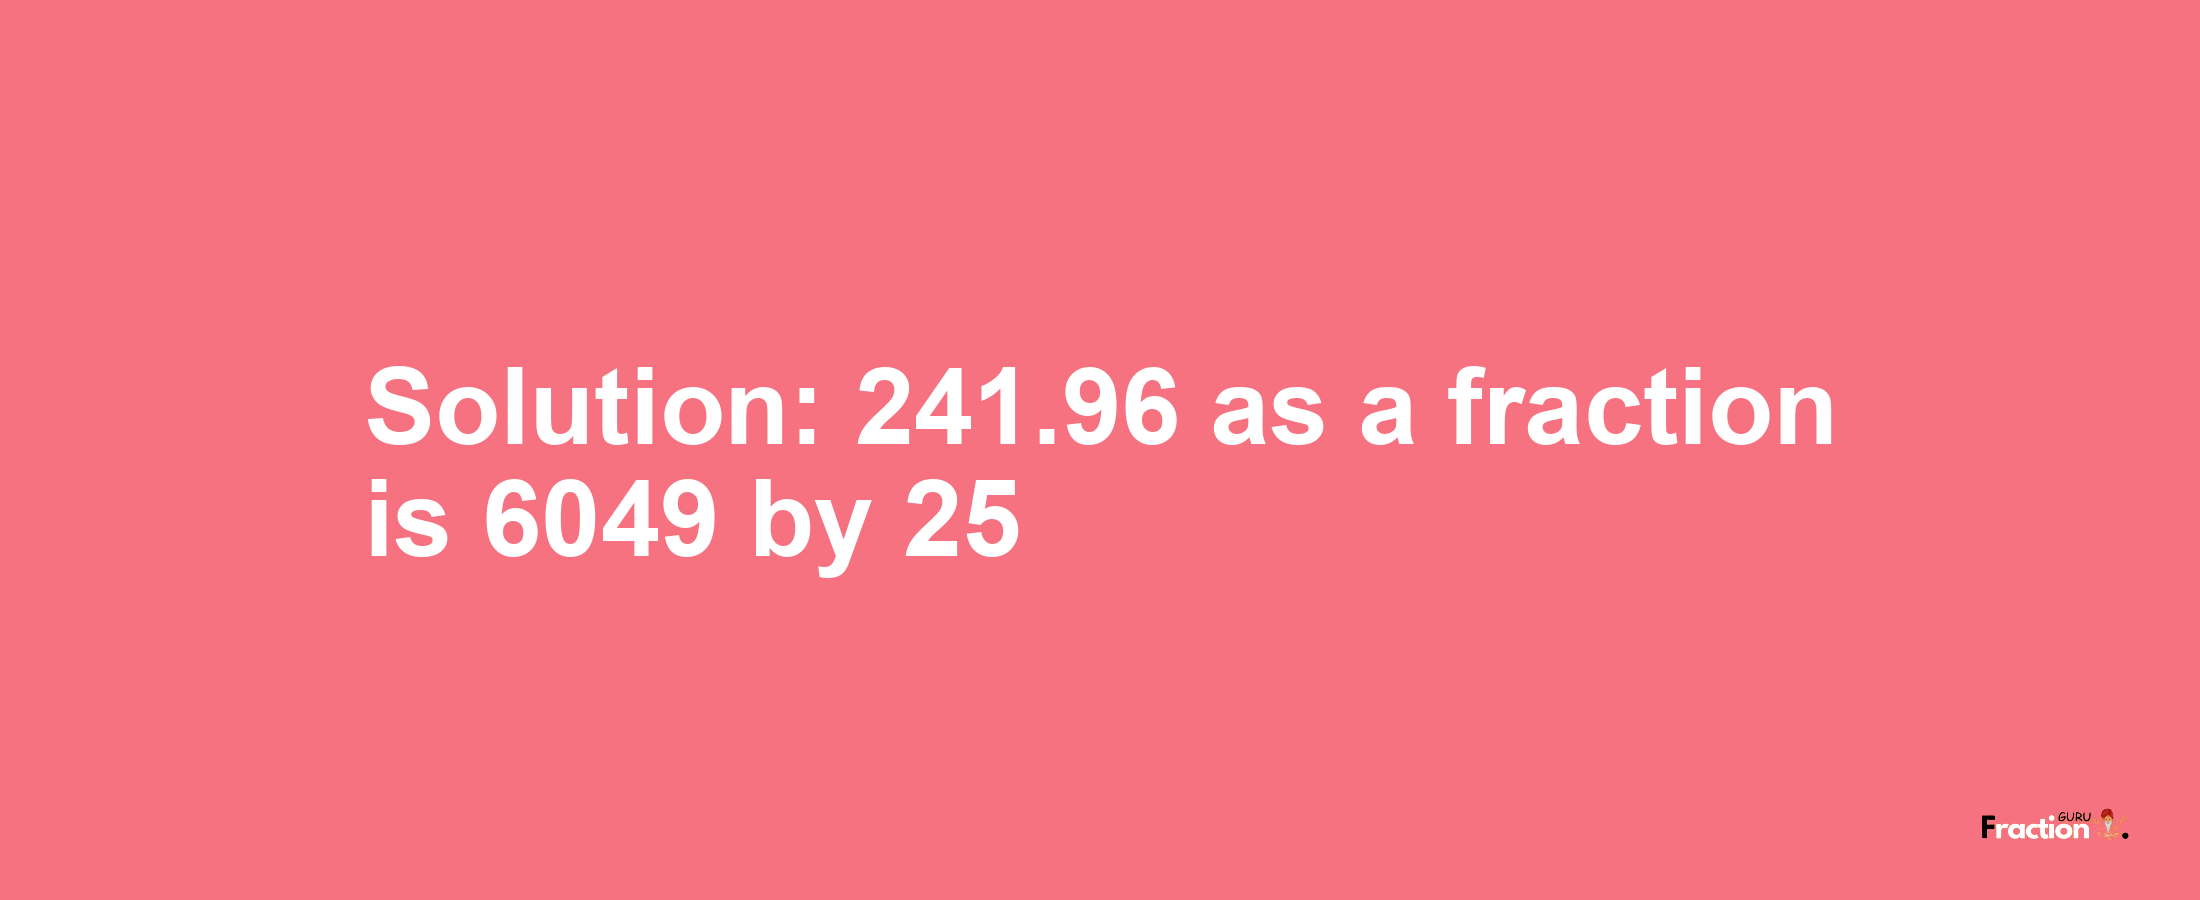 Solution:241.96 as a fraction is 6049/25